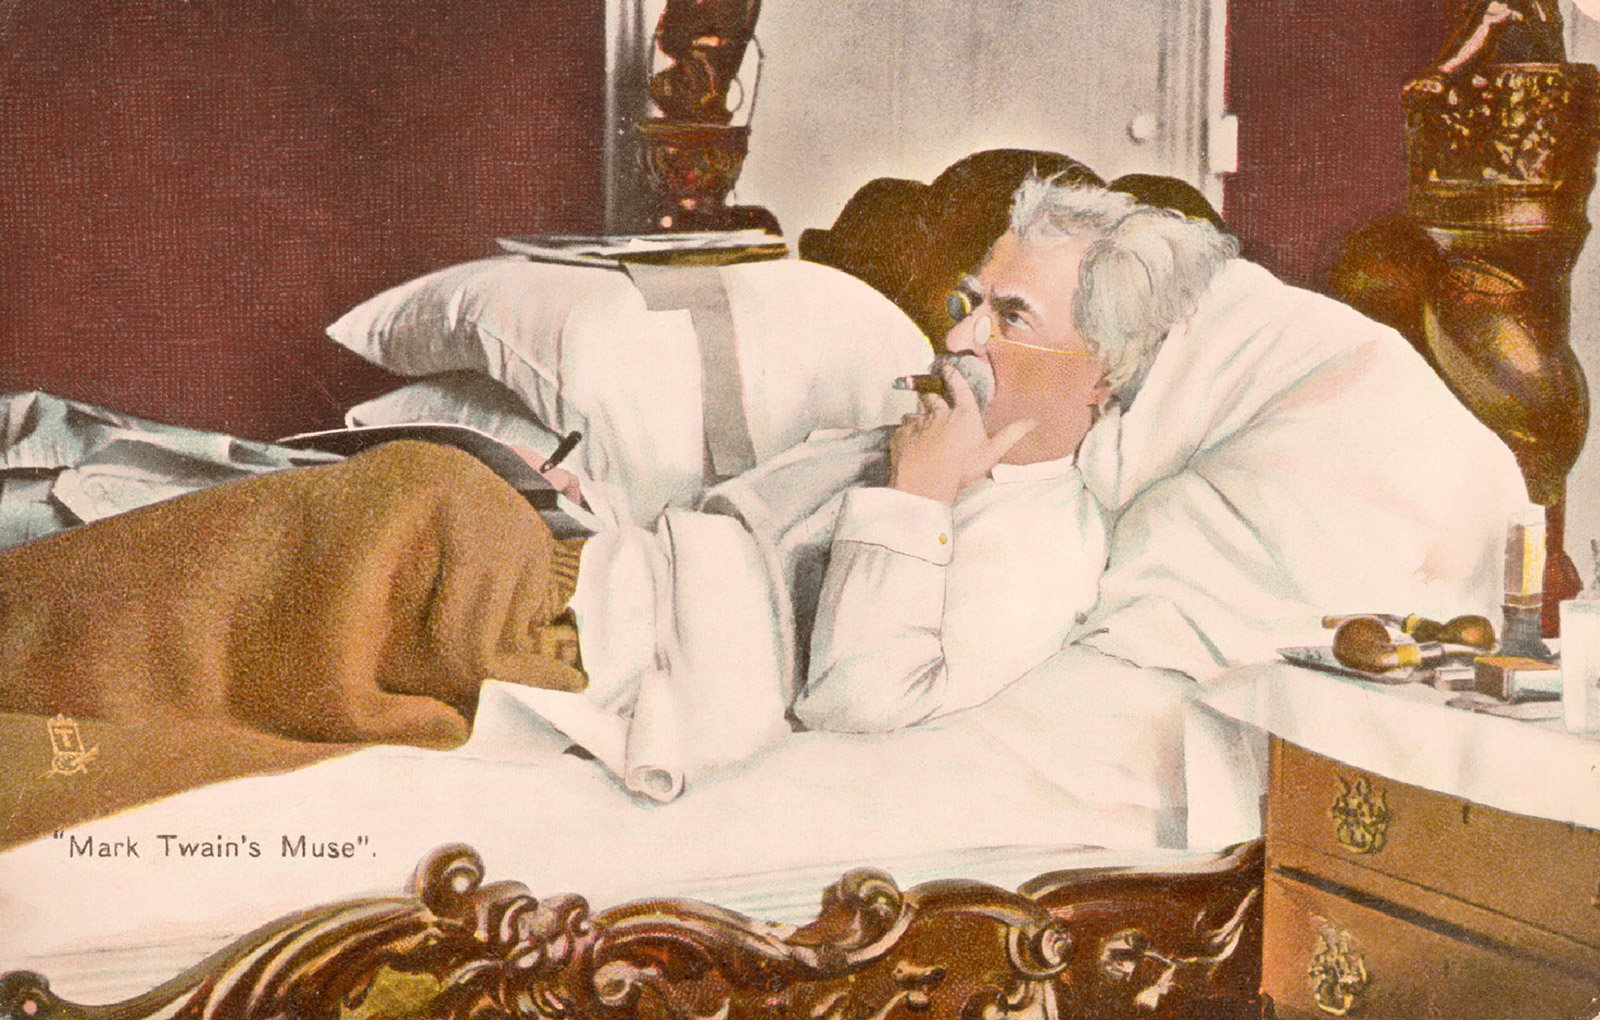 A 1900 Tuck's postcard which shows Mark Twain at work. 